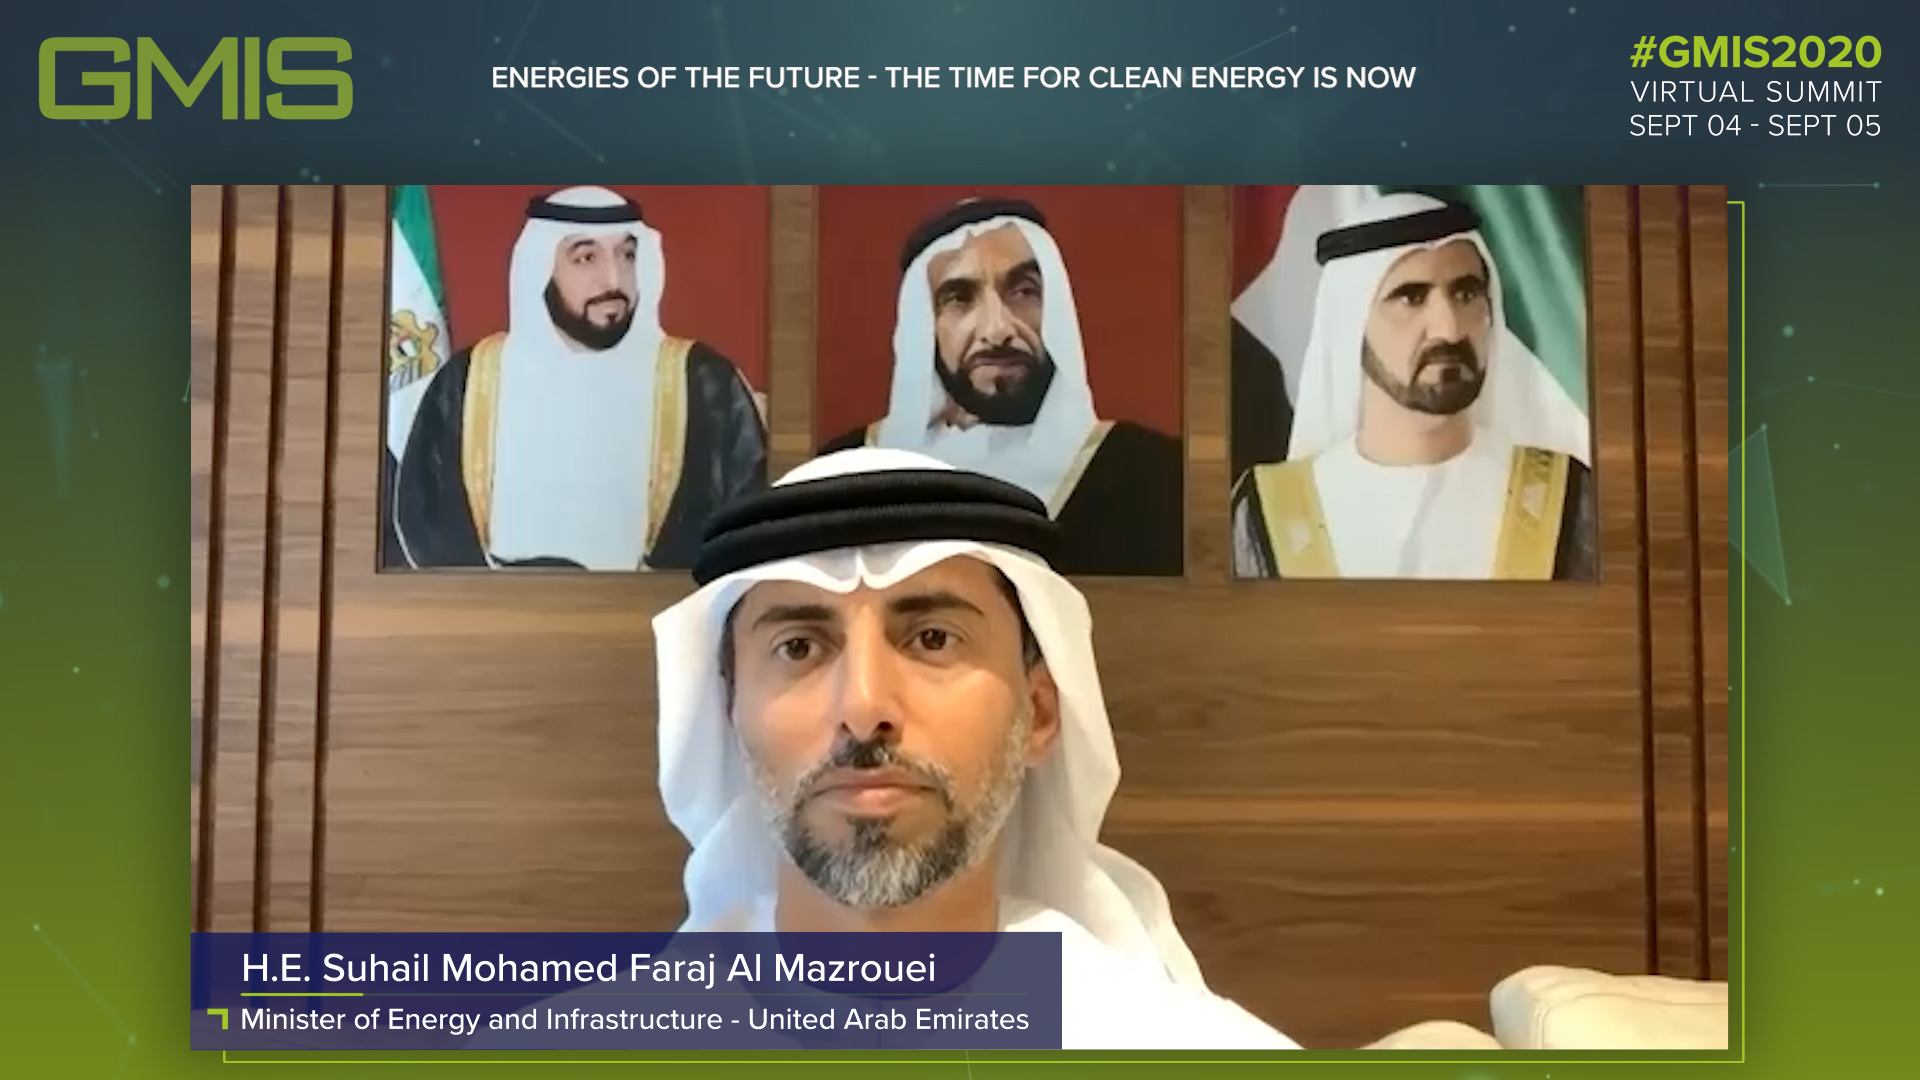 Image for Energy Ministers In Major Oil-Exporting Countries Affirm Their Commitment To Renewable Energy